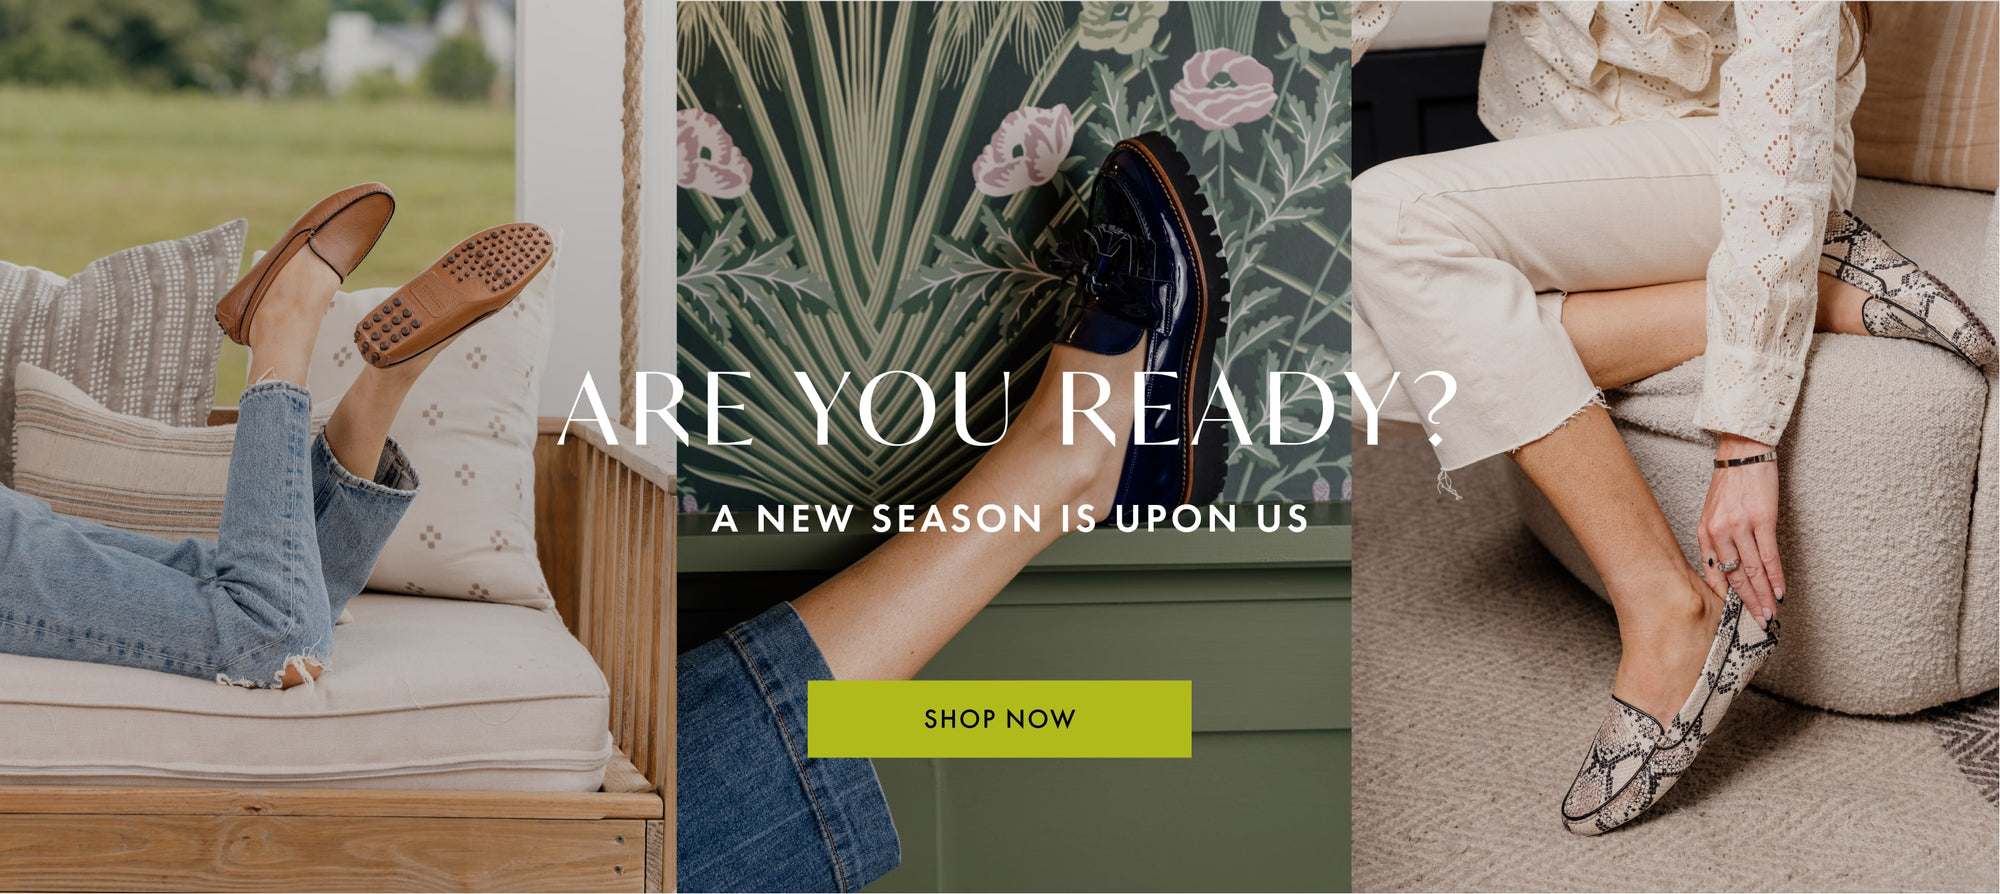 SimplySoles Designer Footwear I 10% off today | Find your solemate